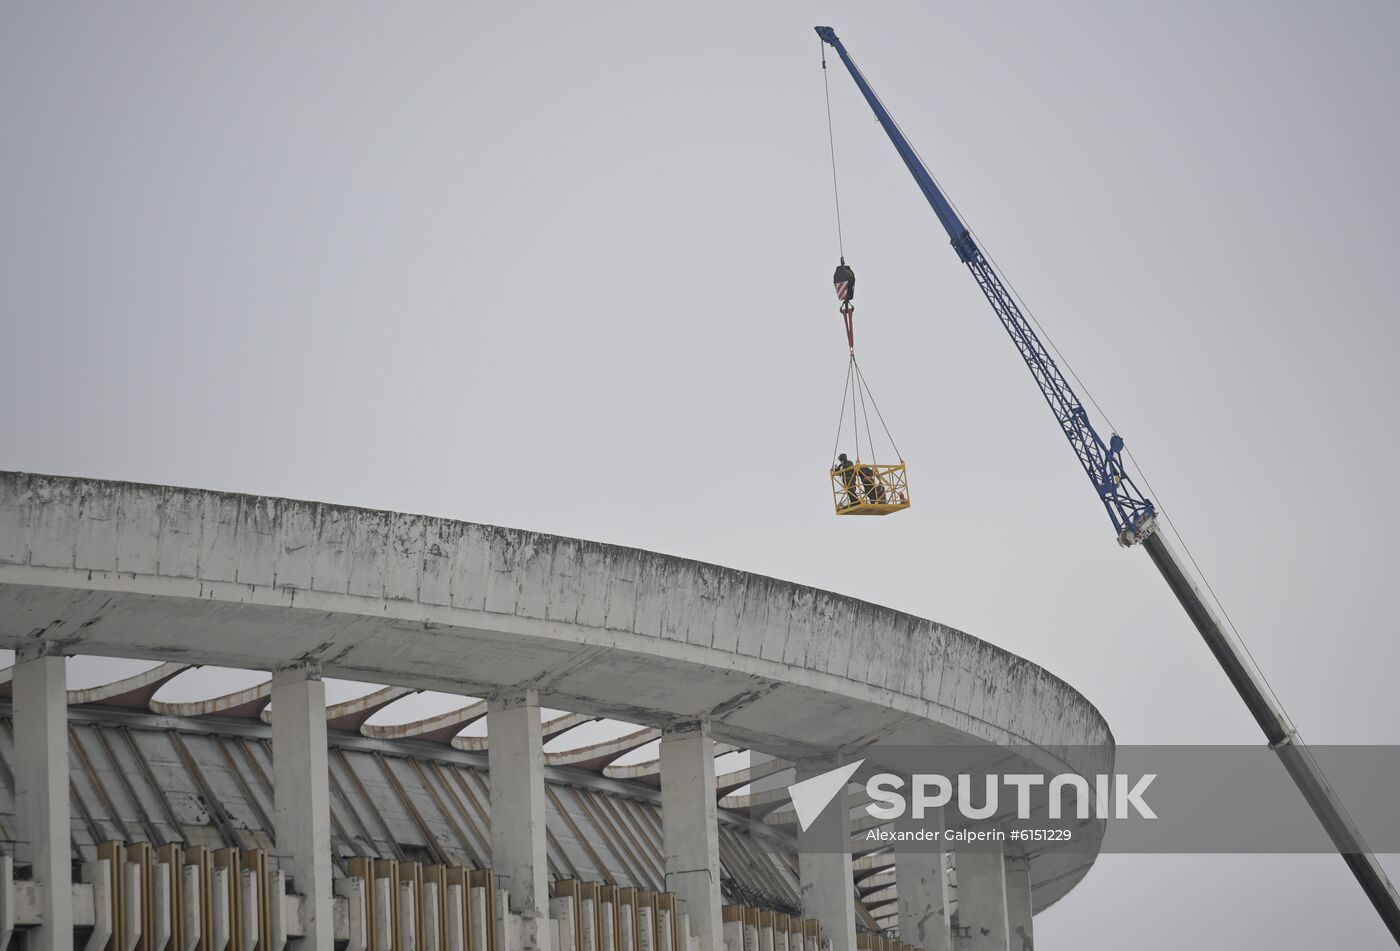 Russia Arena Roof Collapse